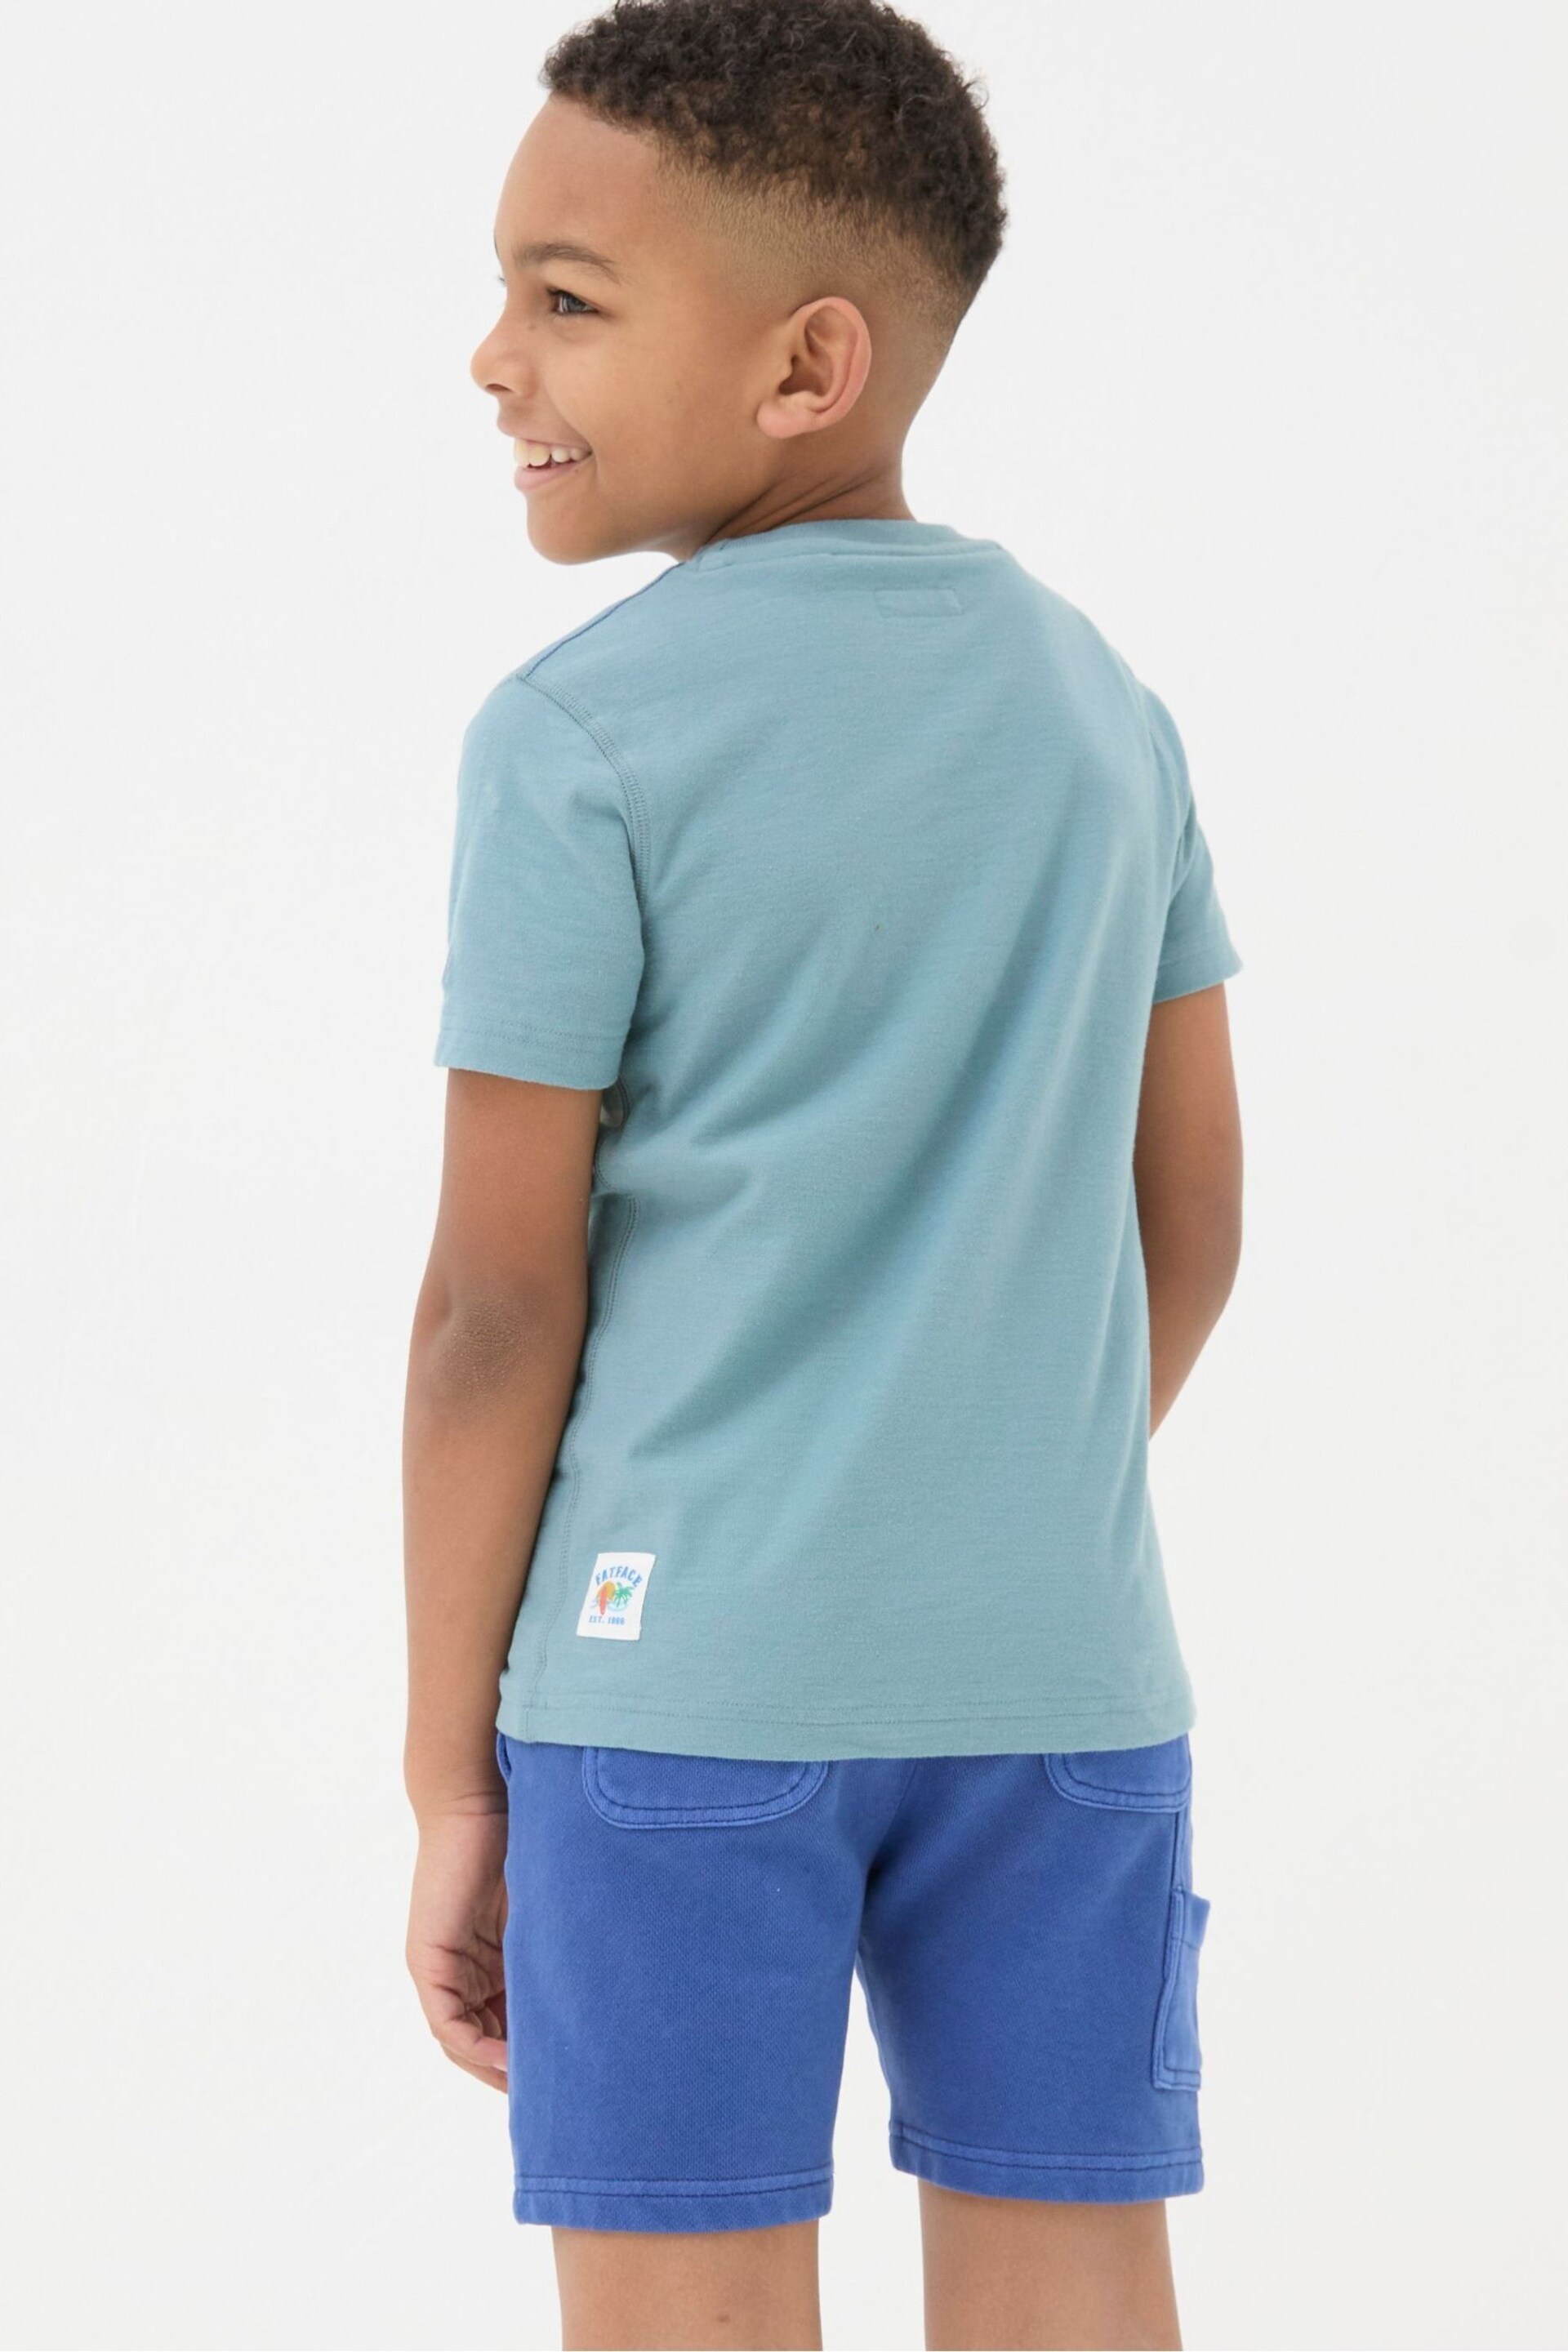 FatFace Blue Chest Stripe Jersey T-Shirt - Image 2 of 3